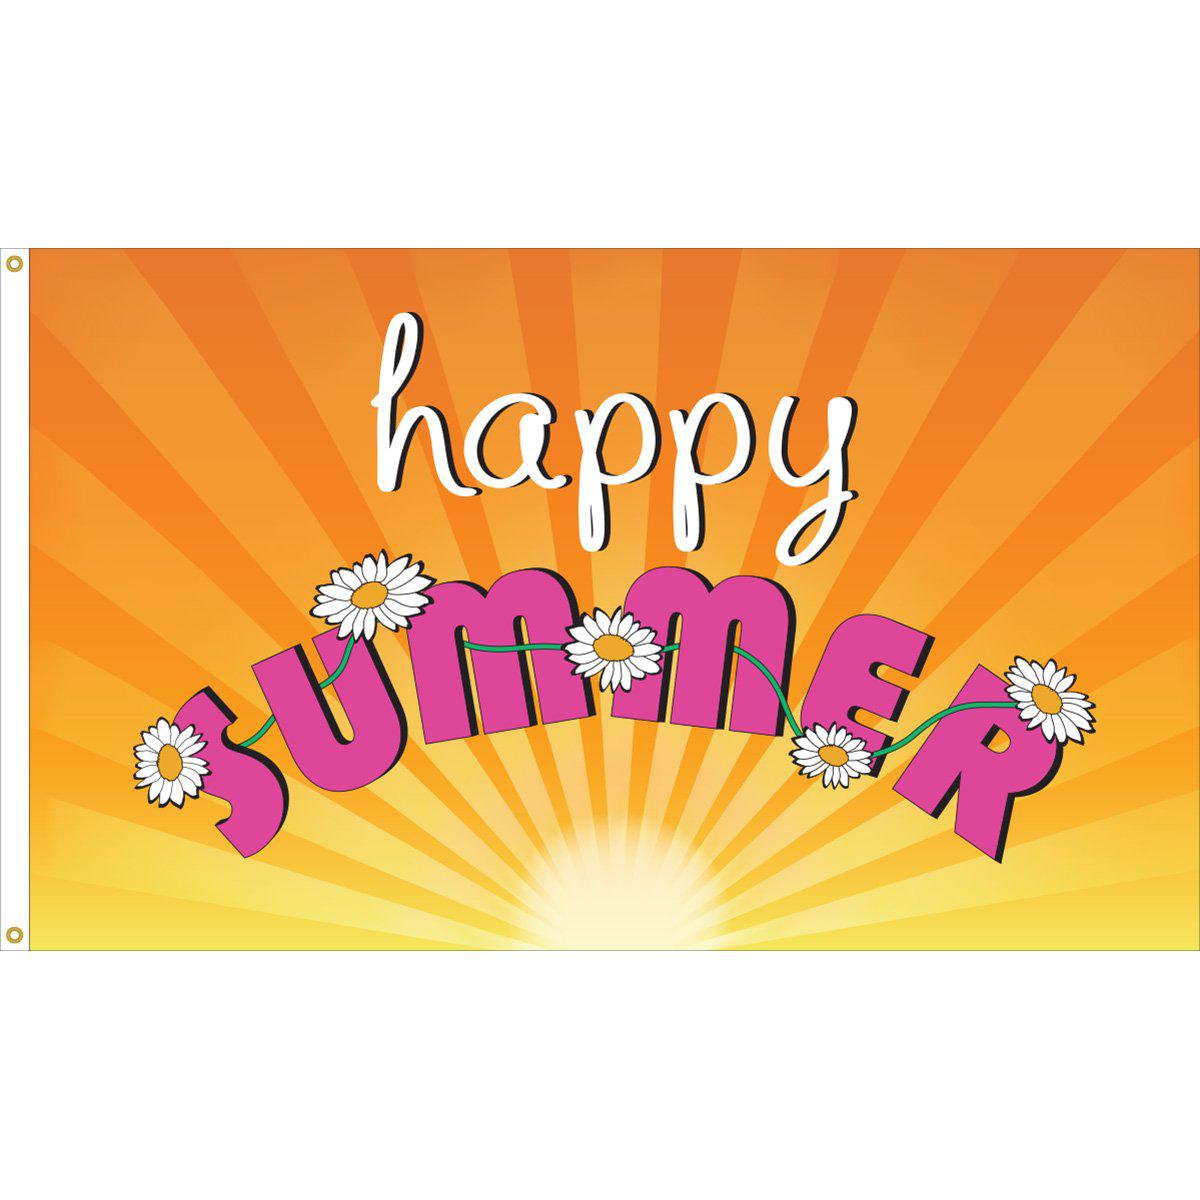 The Happy Summer 3' x 5' flag features rays of sunshine, flowers, and "Happy Summer" message.